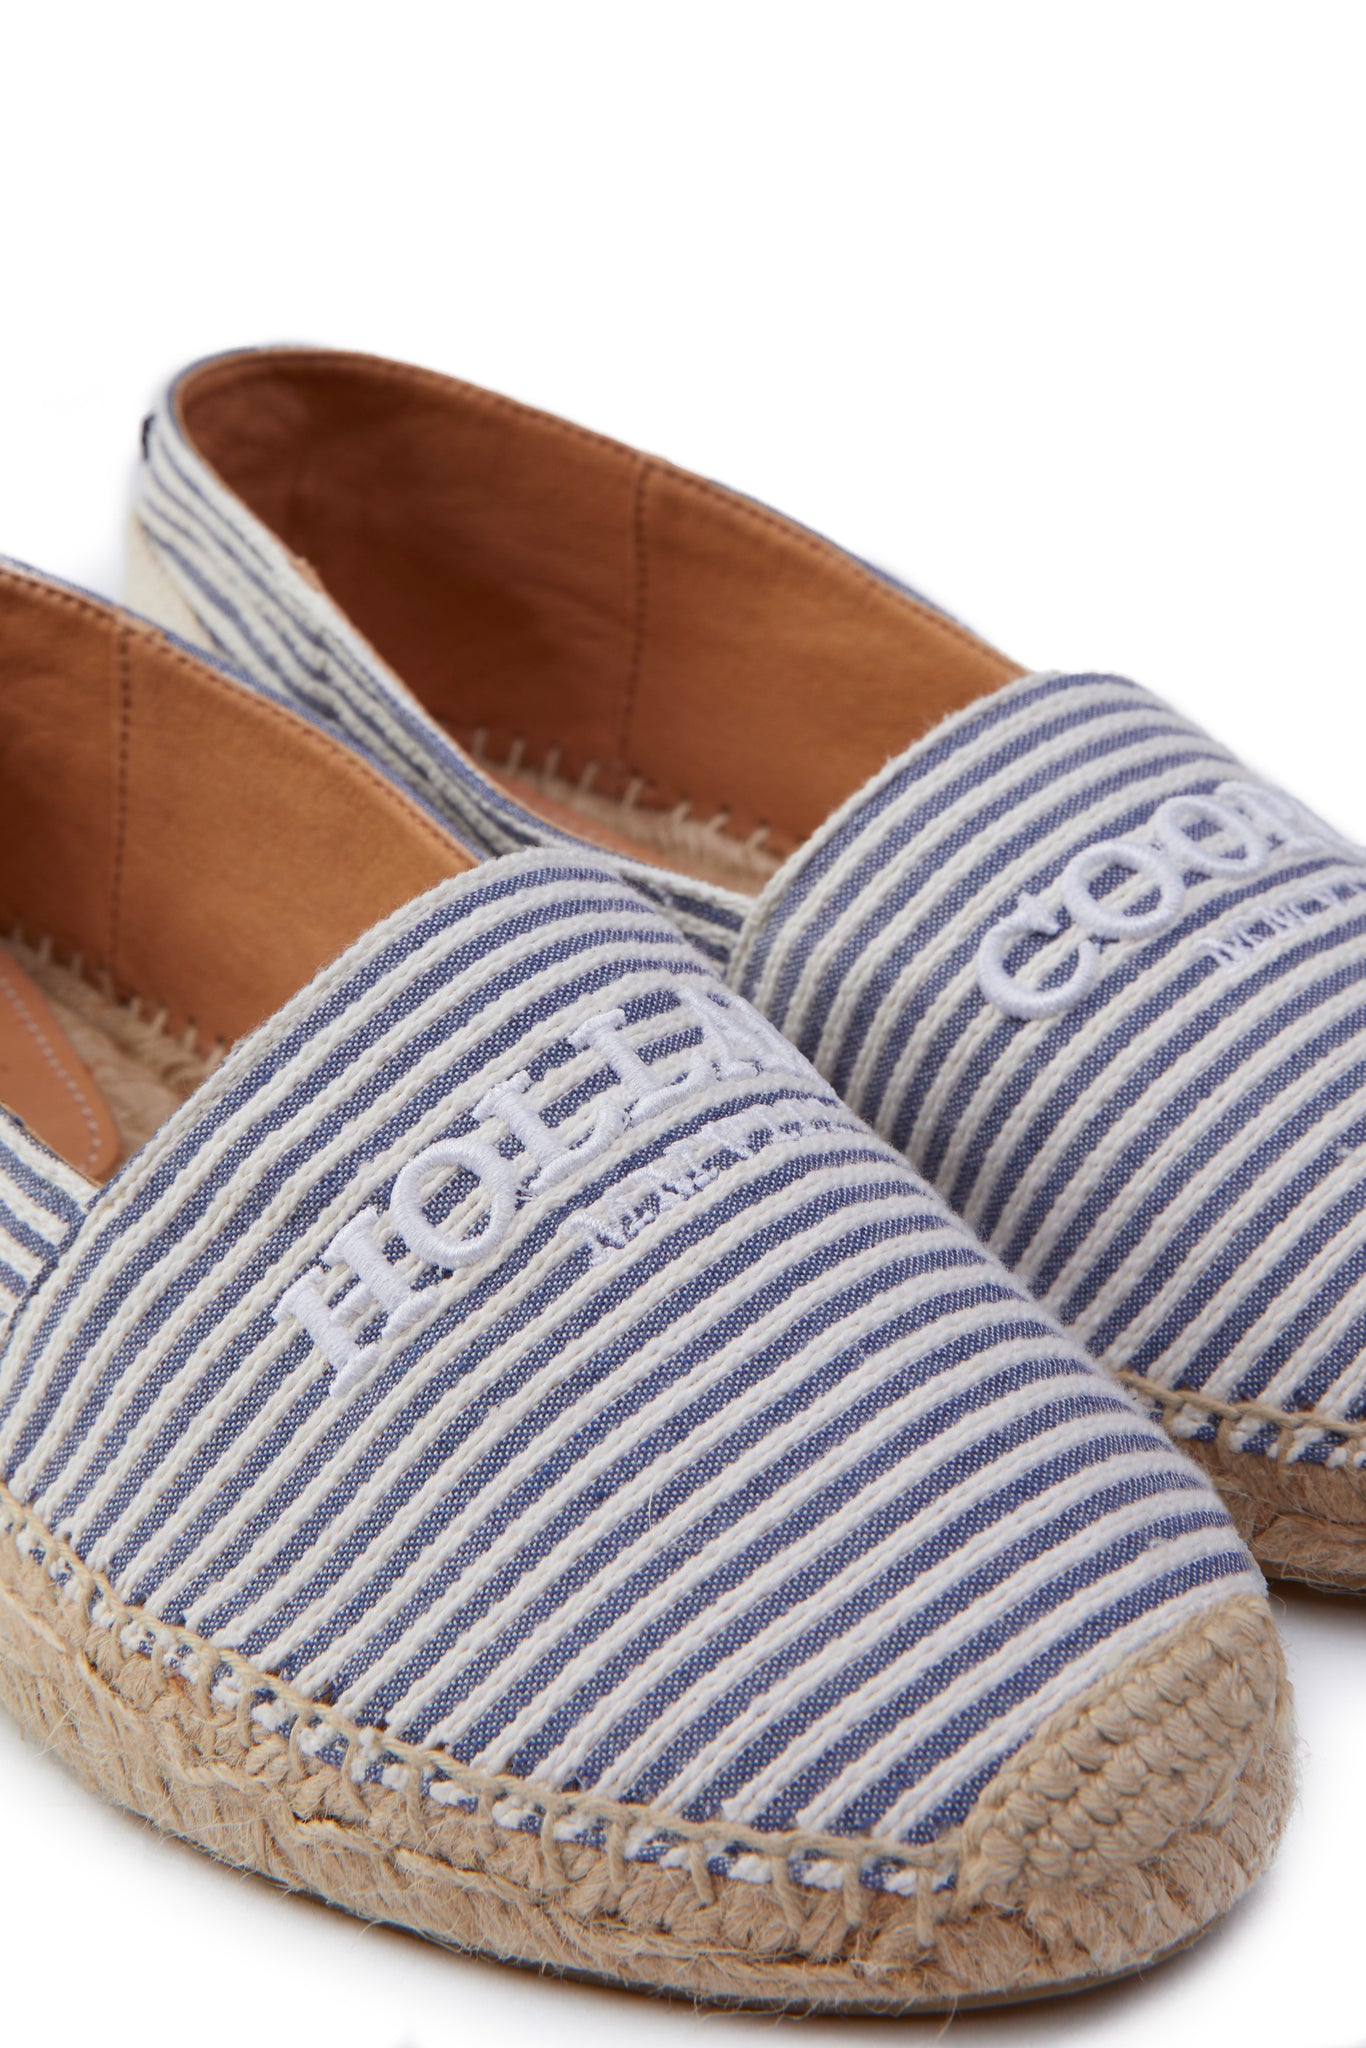 close up of classic style white and blue striped canvas espadrille with plaited jute sole and jute toe cap with white embroidered branding on top